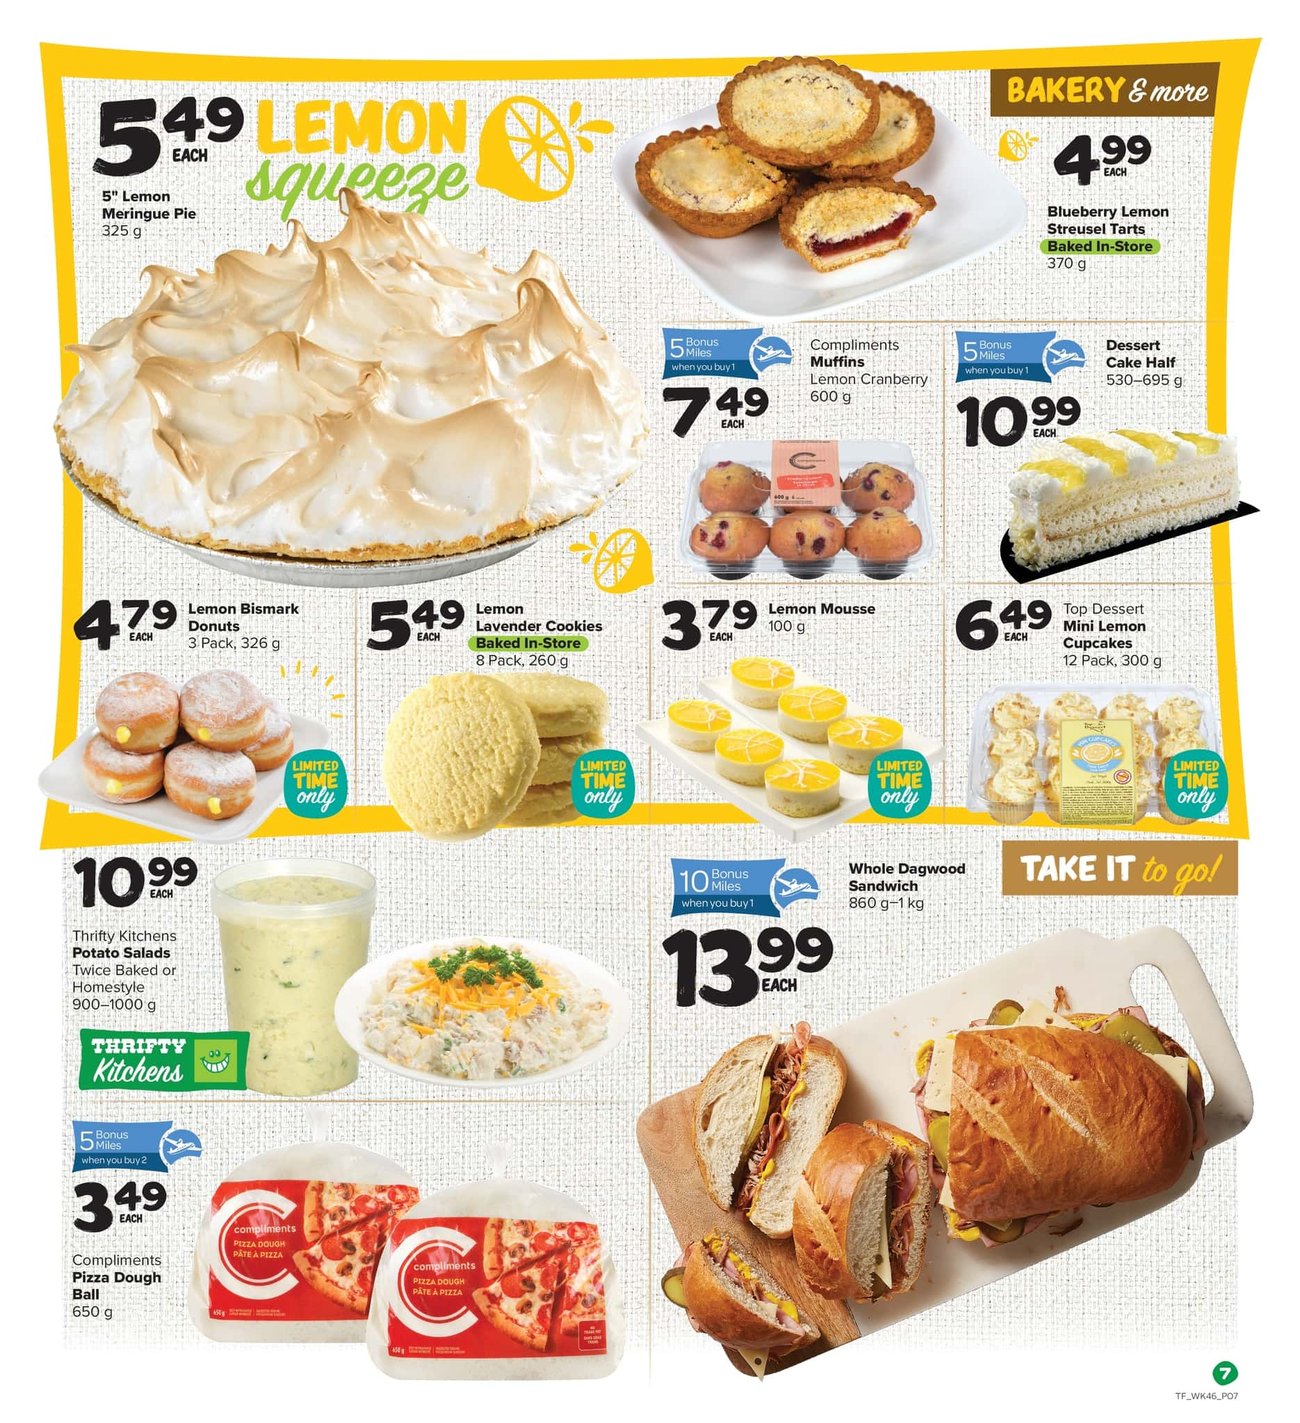 Thrifty Foods - Weekly Flyer Specials - Page 7